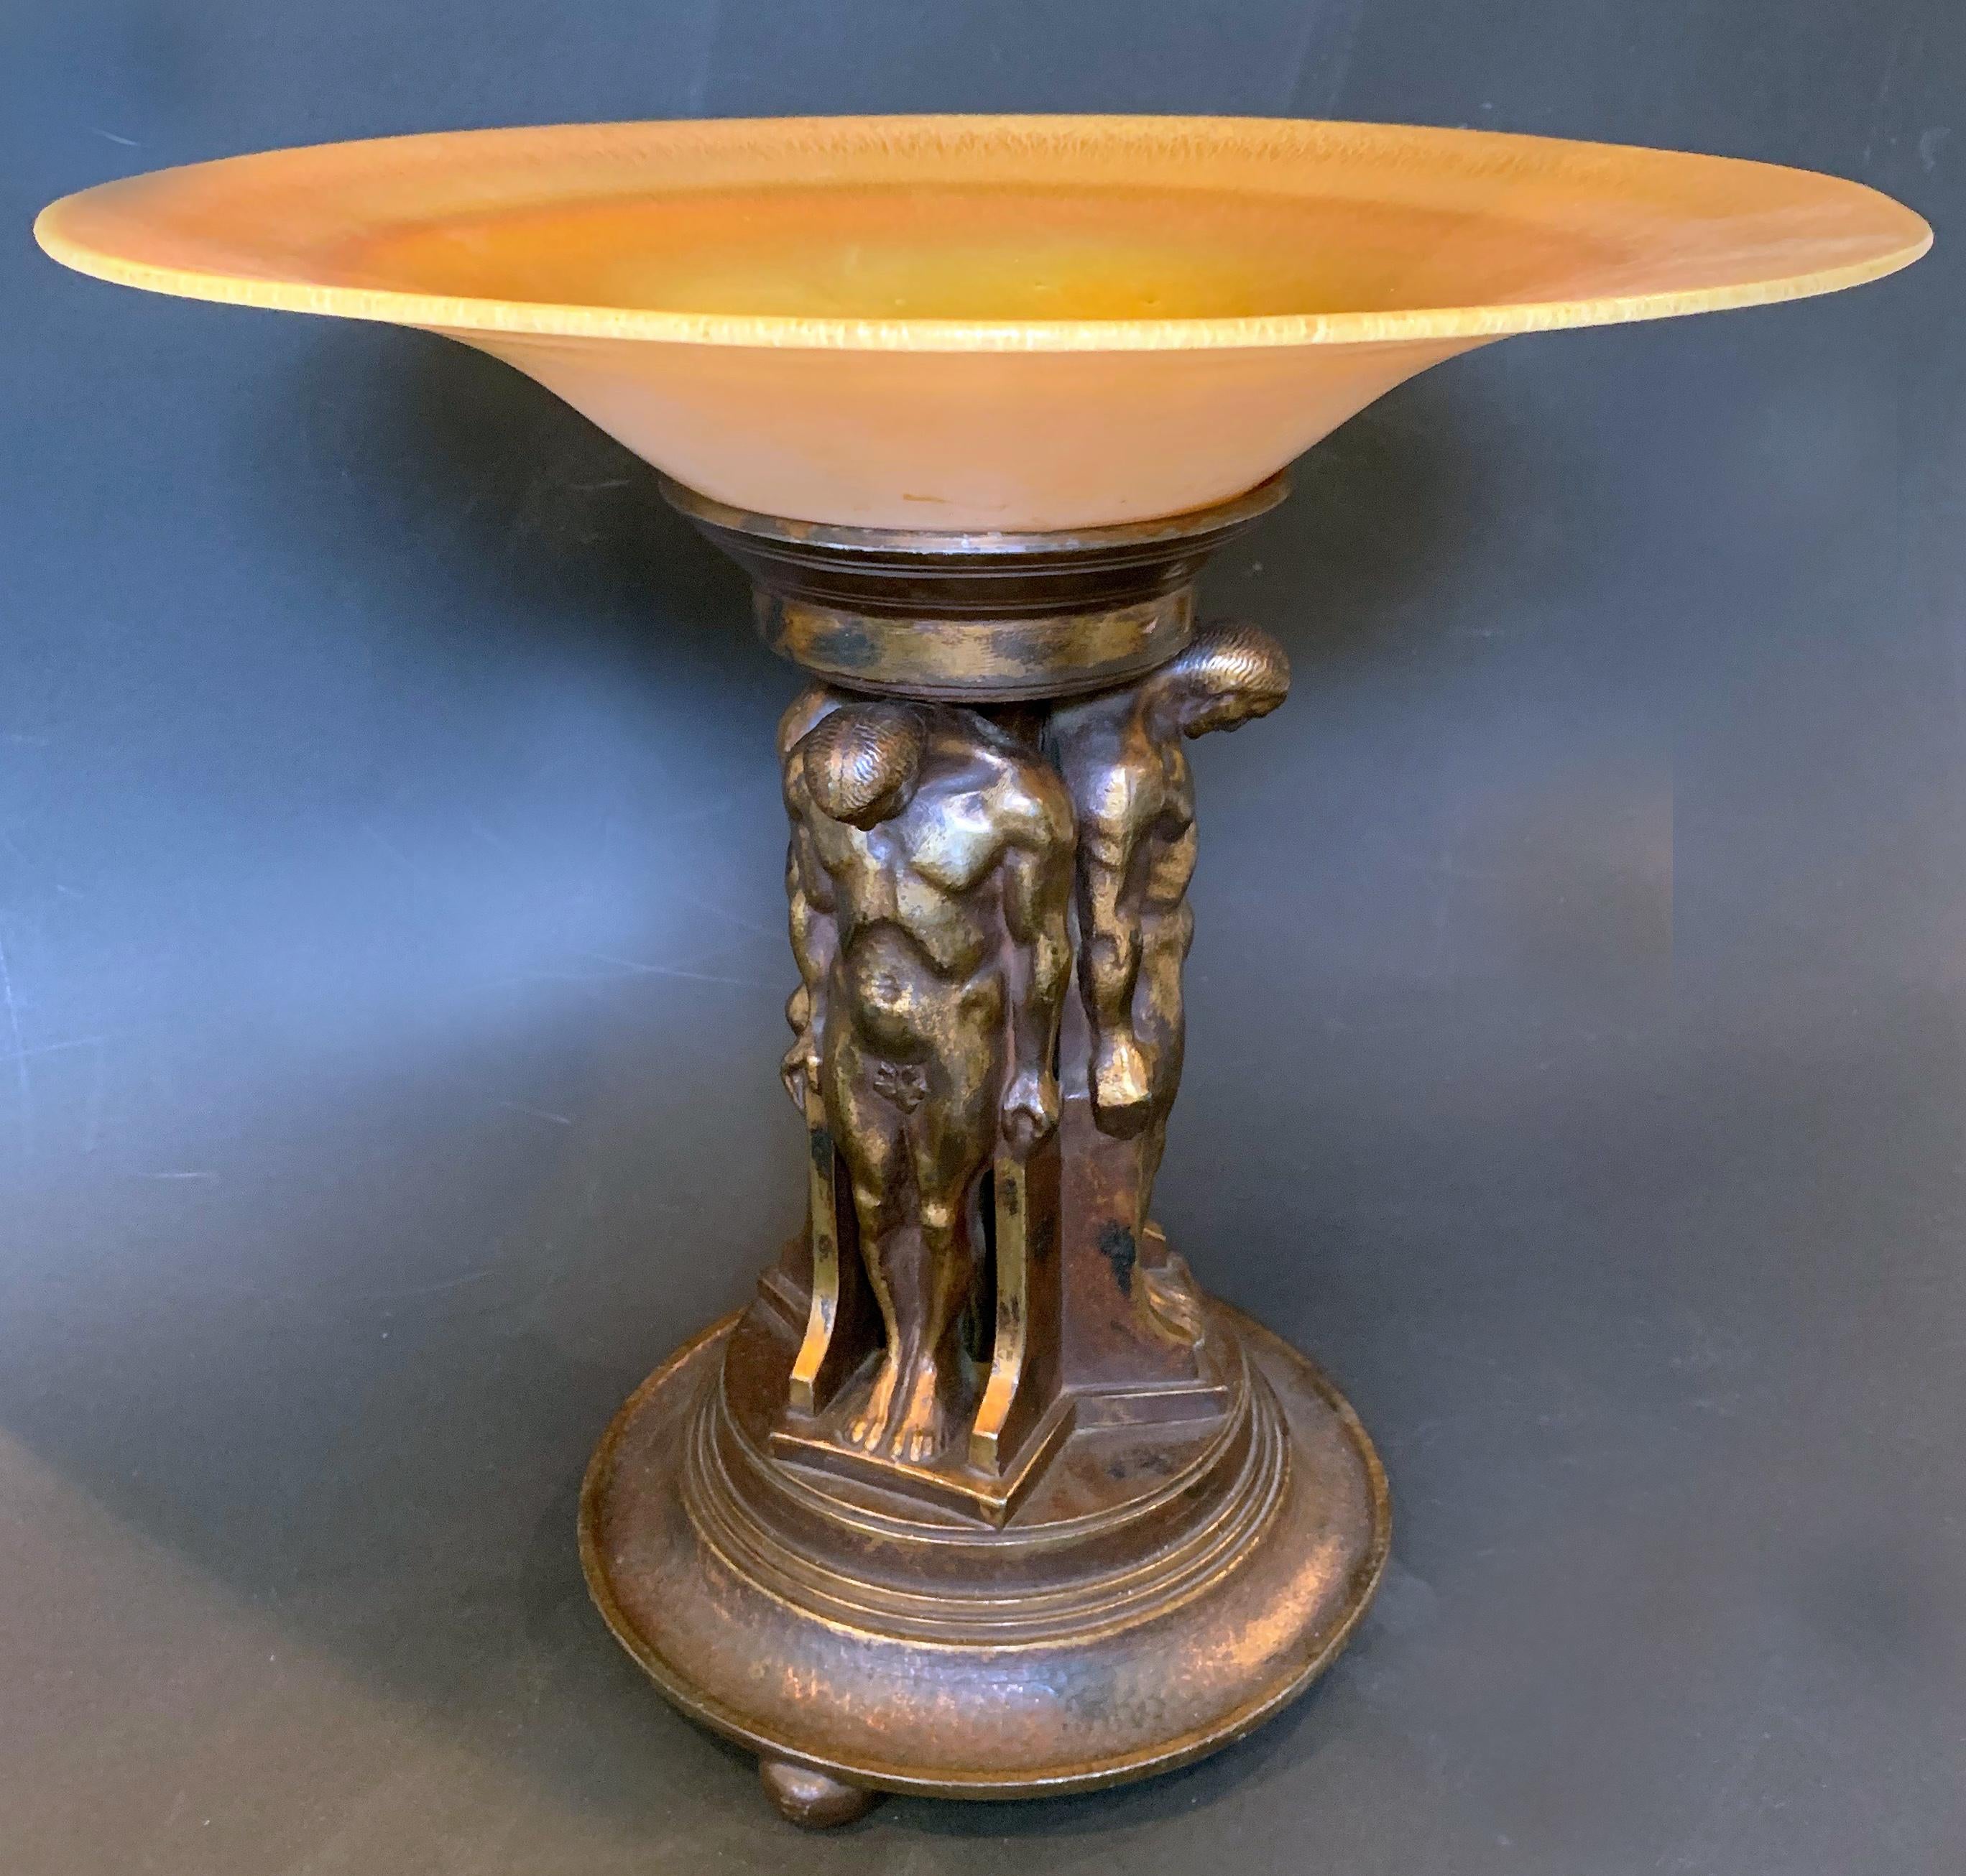 Stunning in design and execution, this large Art Deco compote is composed of a bronze base featuring a group of nude male caryatids supporting a gorgeous, gold-hued glass compote made by Lustre Glass. Oscar Bach used the nude male caryatid motif in